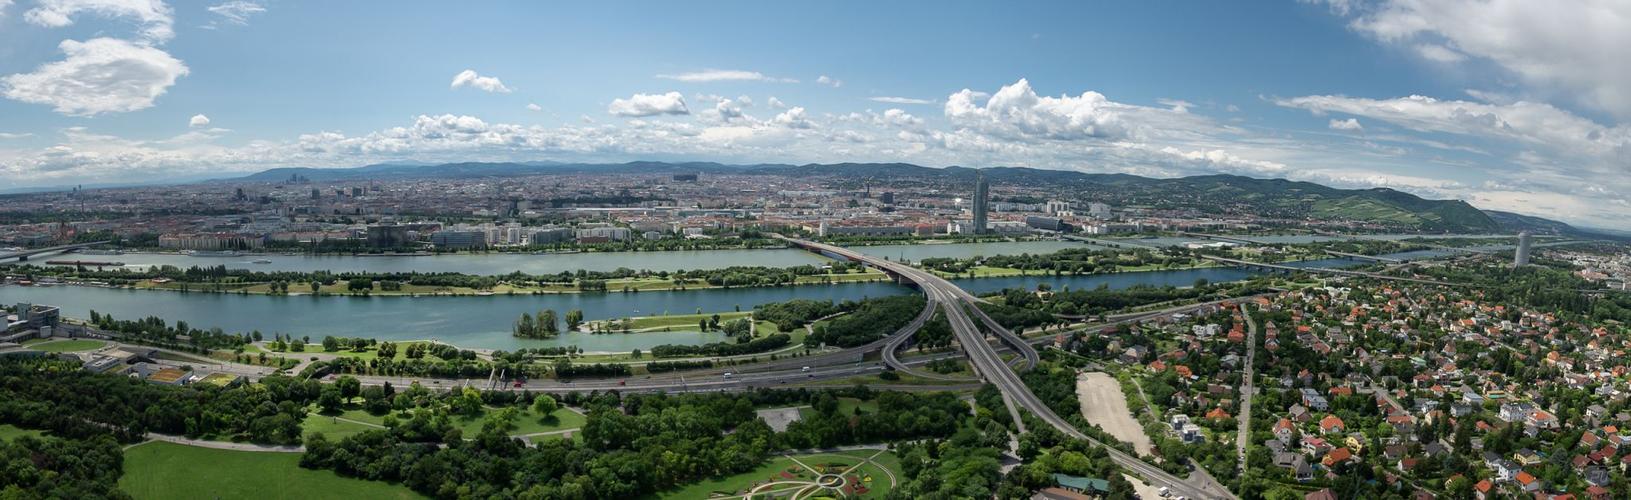 View over Vienna from the Danube Tower